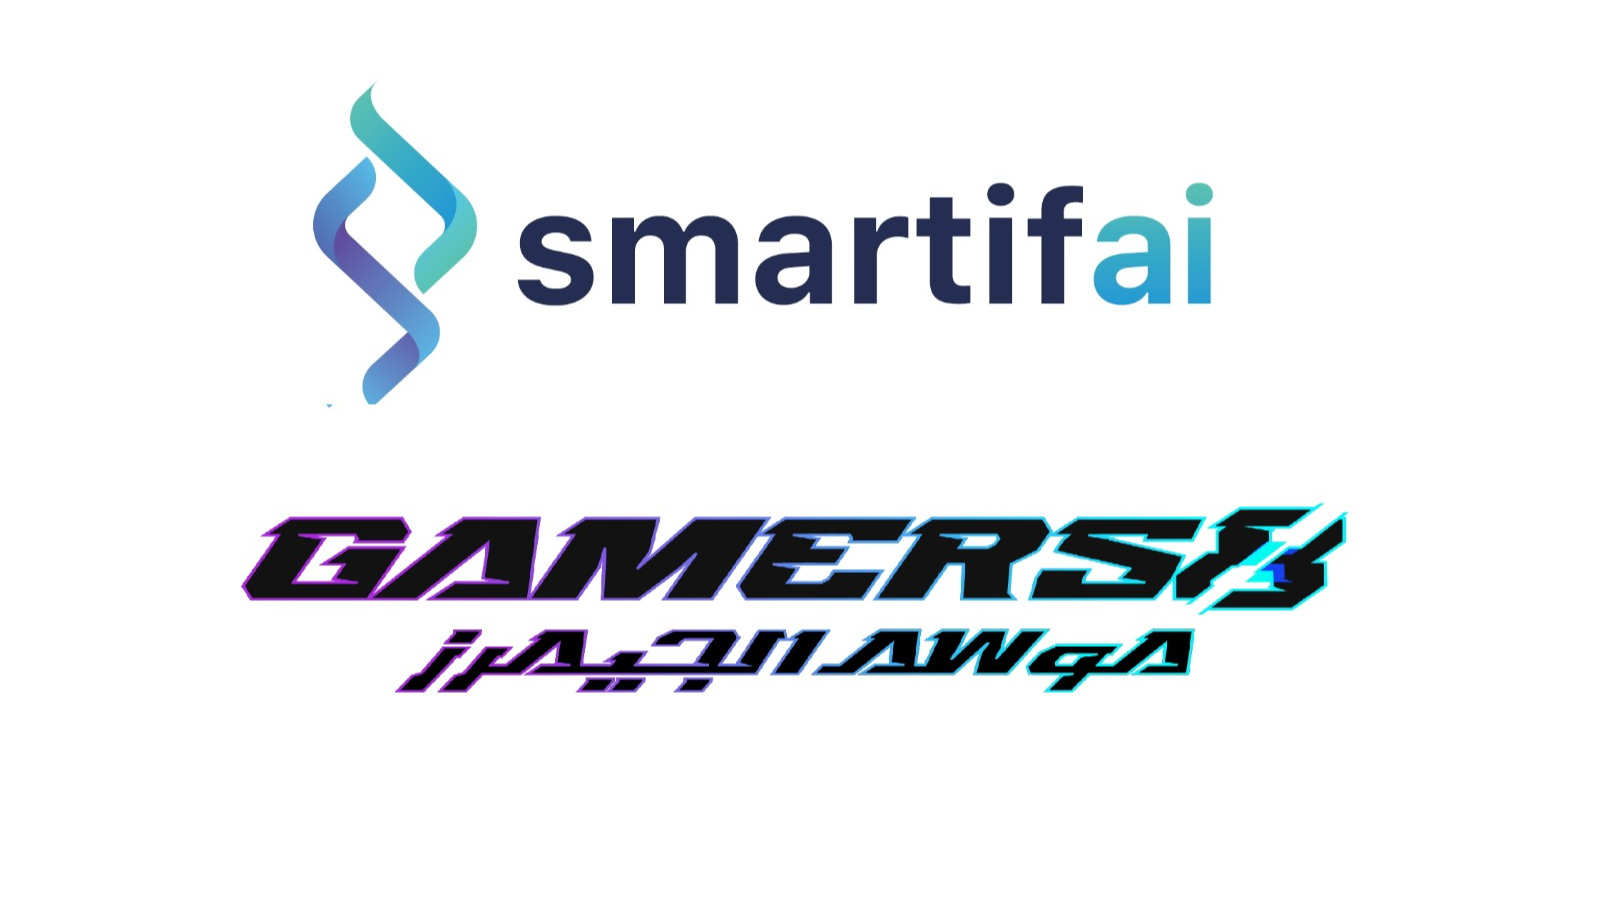 https://adgully.me/post/3957/extend-adnetwork-witnesses-success-of-gamers8-collaboration-with-smarifai